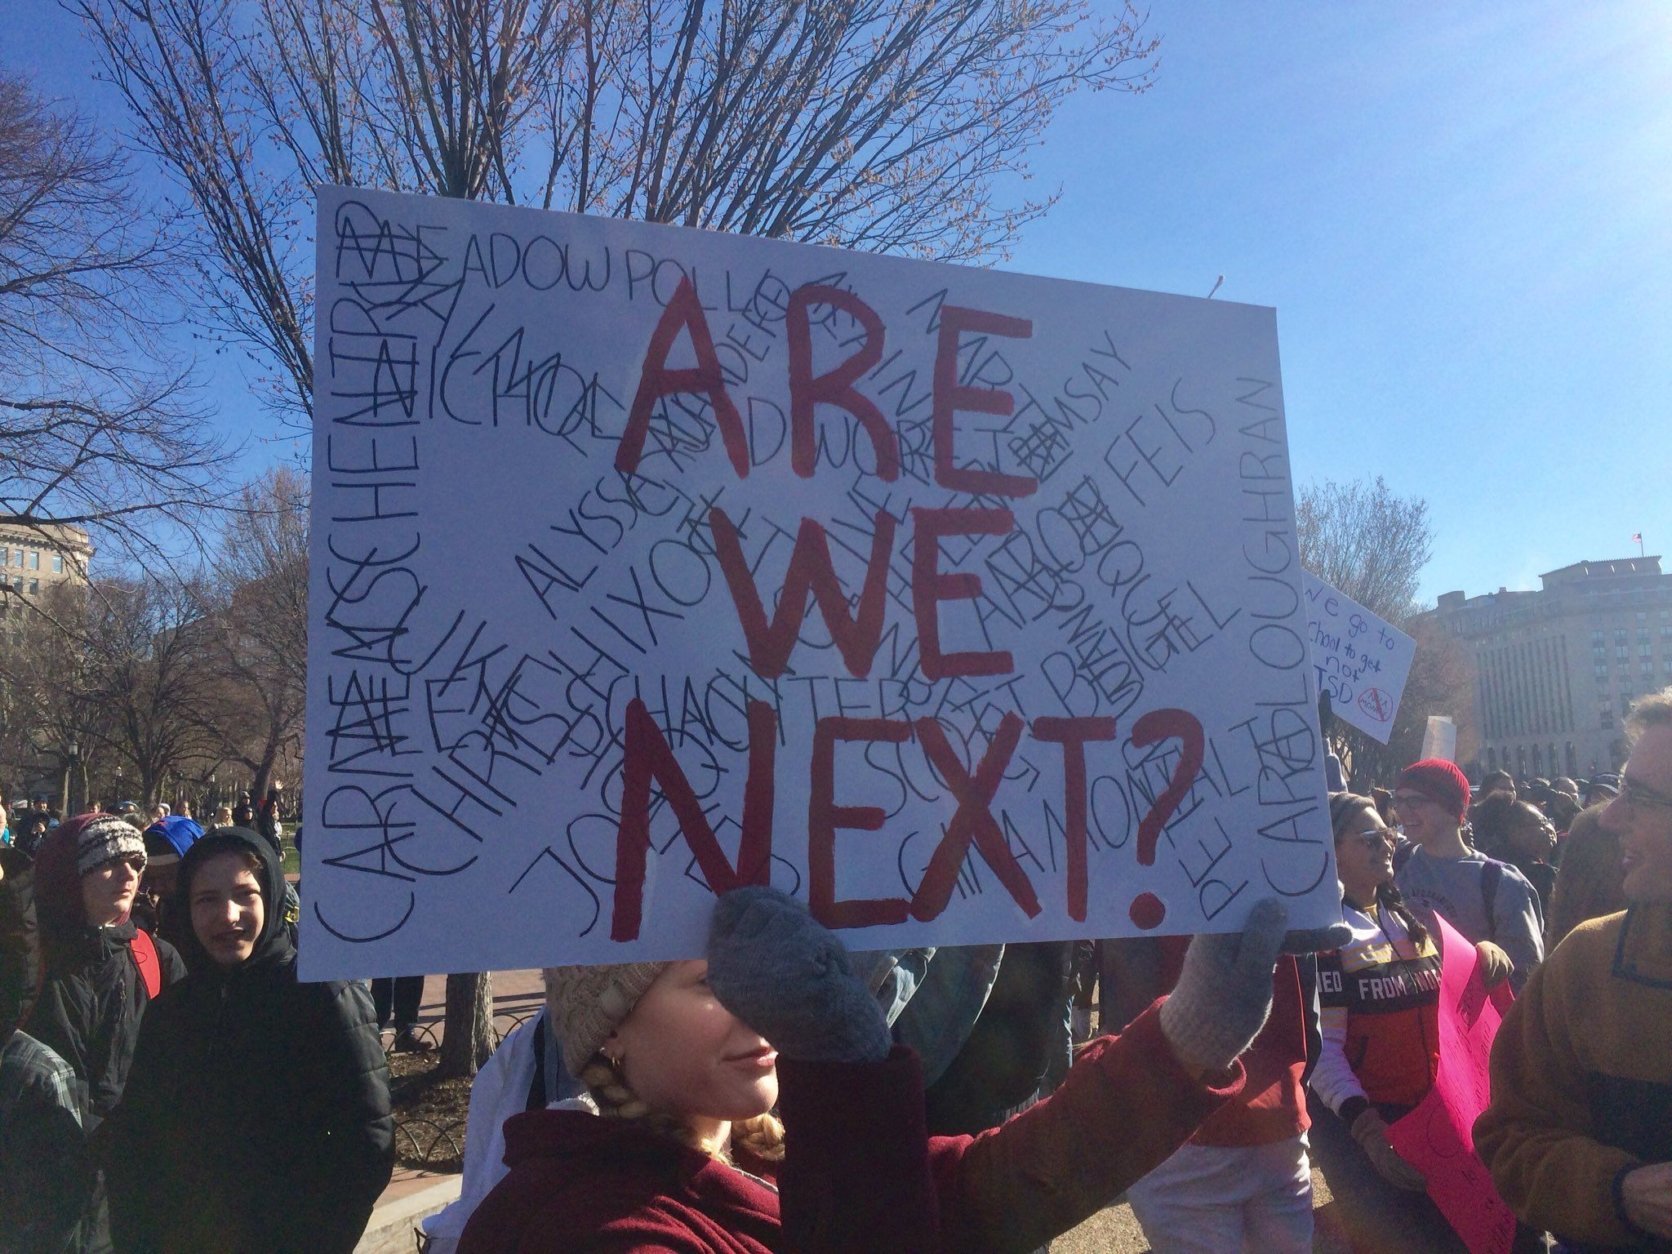 A sign at the National School Walkout, in front of the Capitol on March 14, 2018. (WTOP/Nick Iannelli)